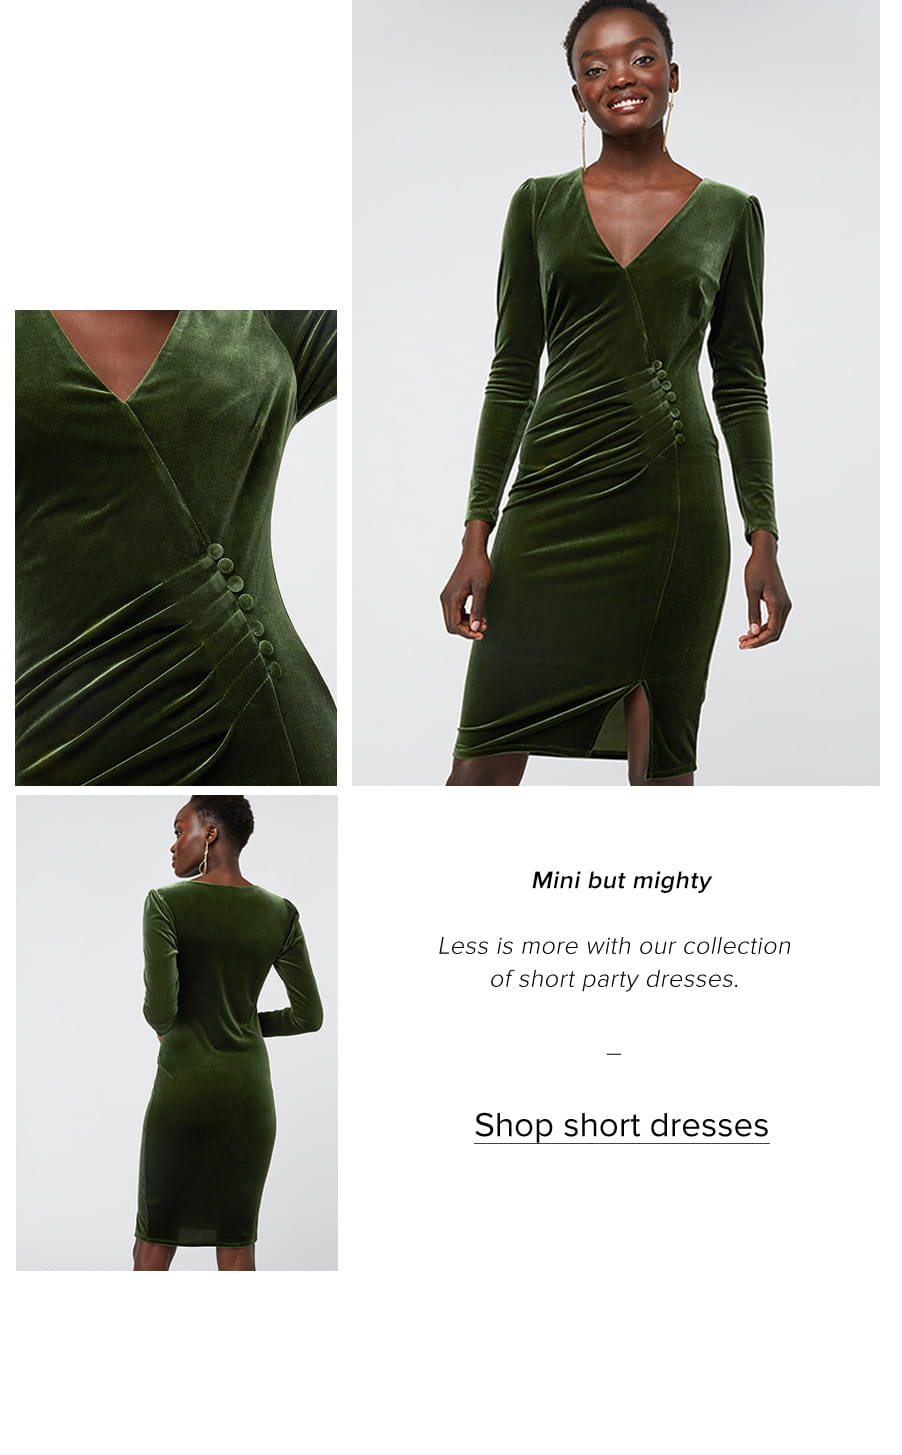 Mini but Mighty. Less is more with our collection of short party dresses. Shop short dresses